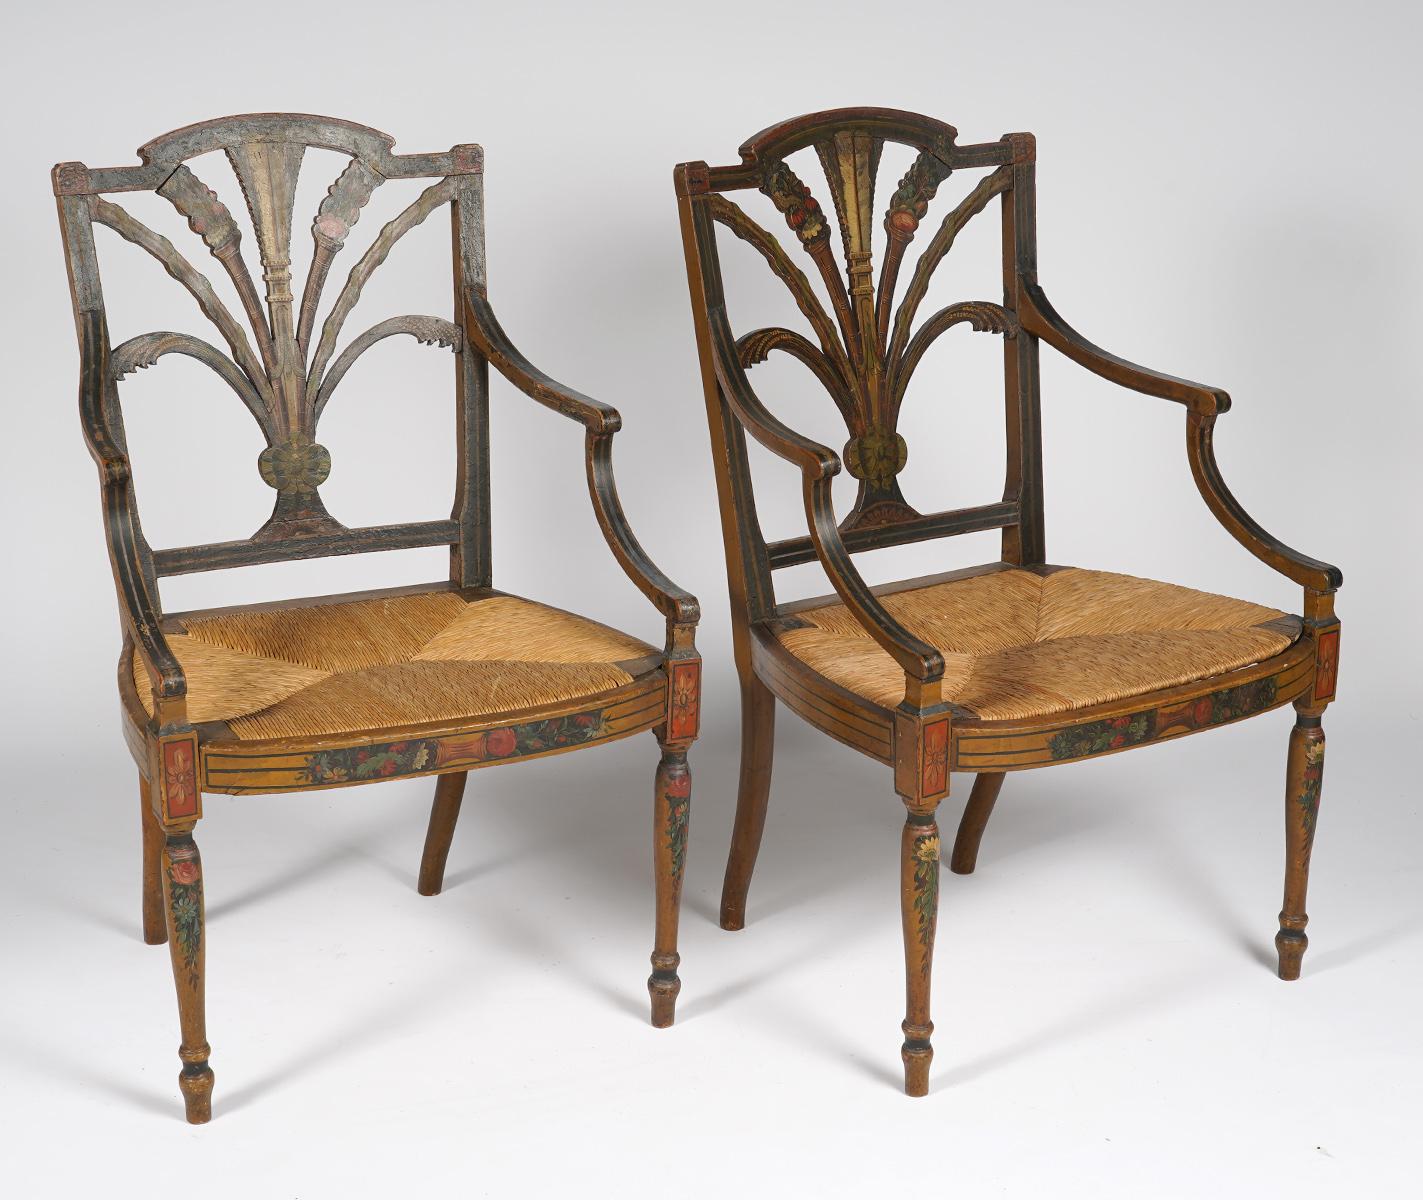 19th Century Pair of English Regency Carved and Paint Decorated Rush Seat Armchairs